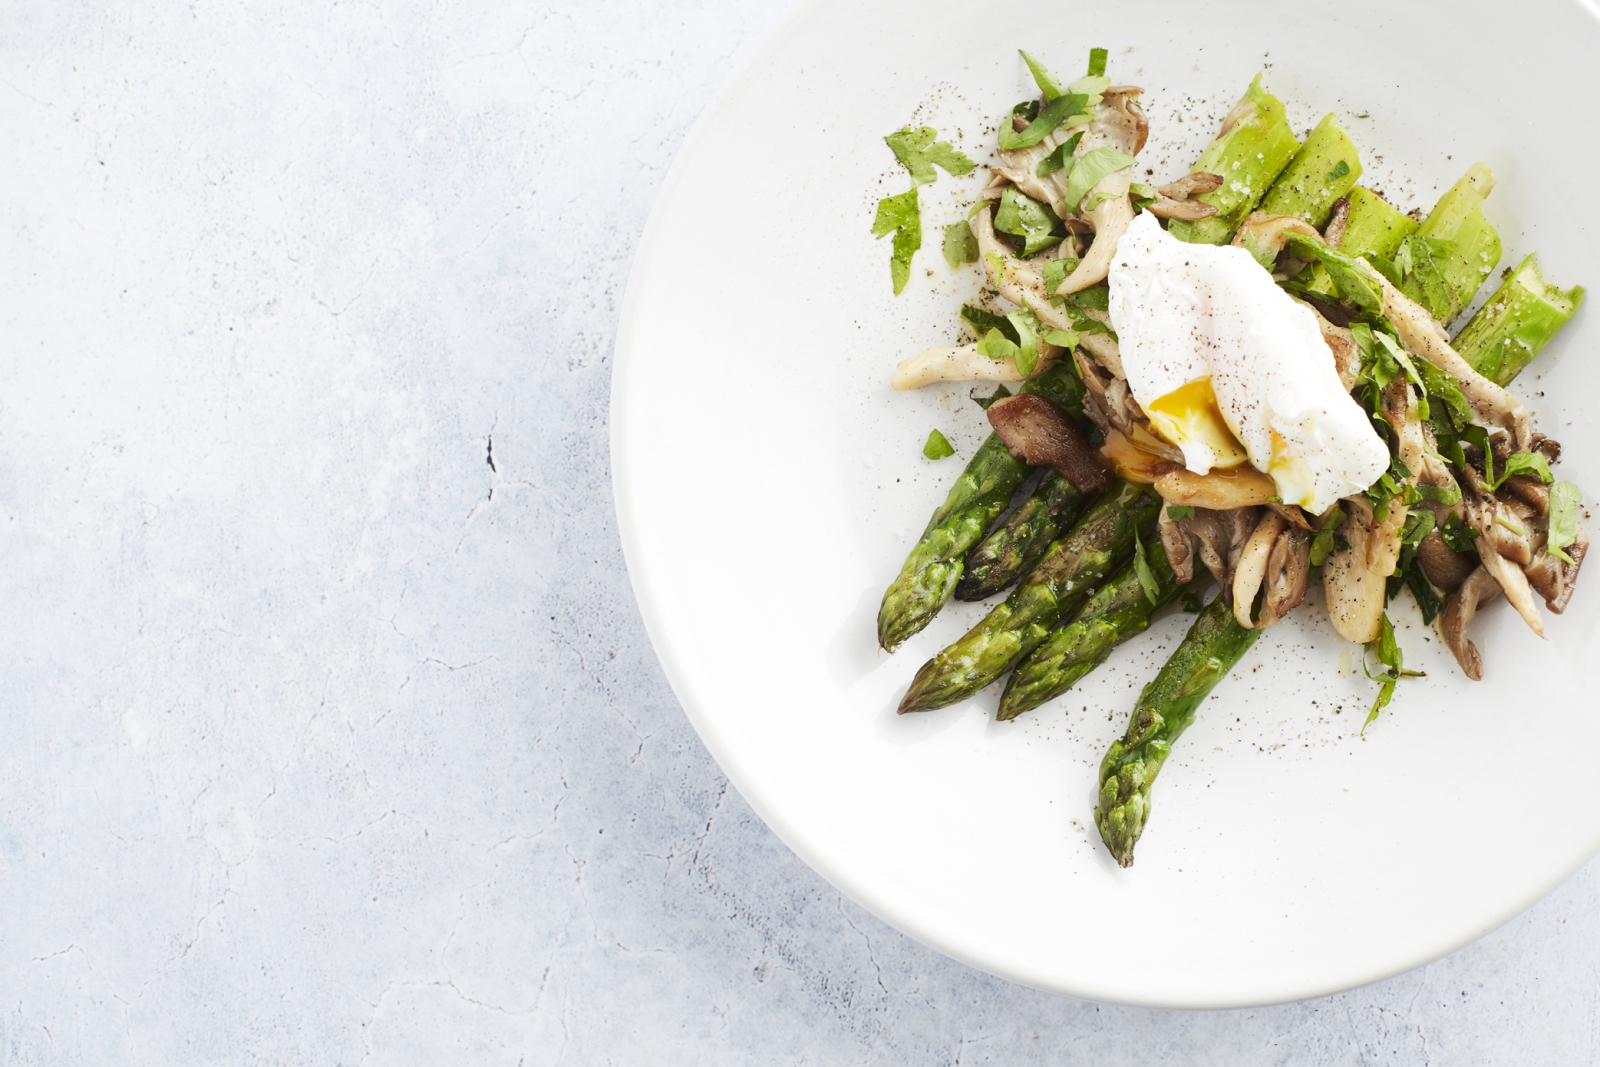 Grilled Asparagus with Mushrooms & Poached Egg - Vegetarian Keto Recipe - Start to Keto eBook